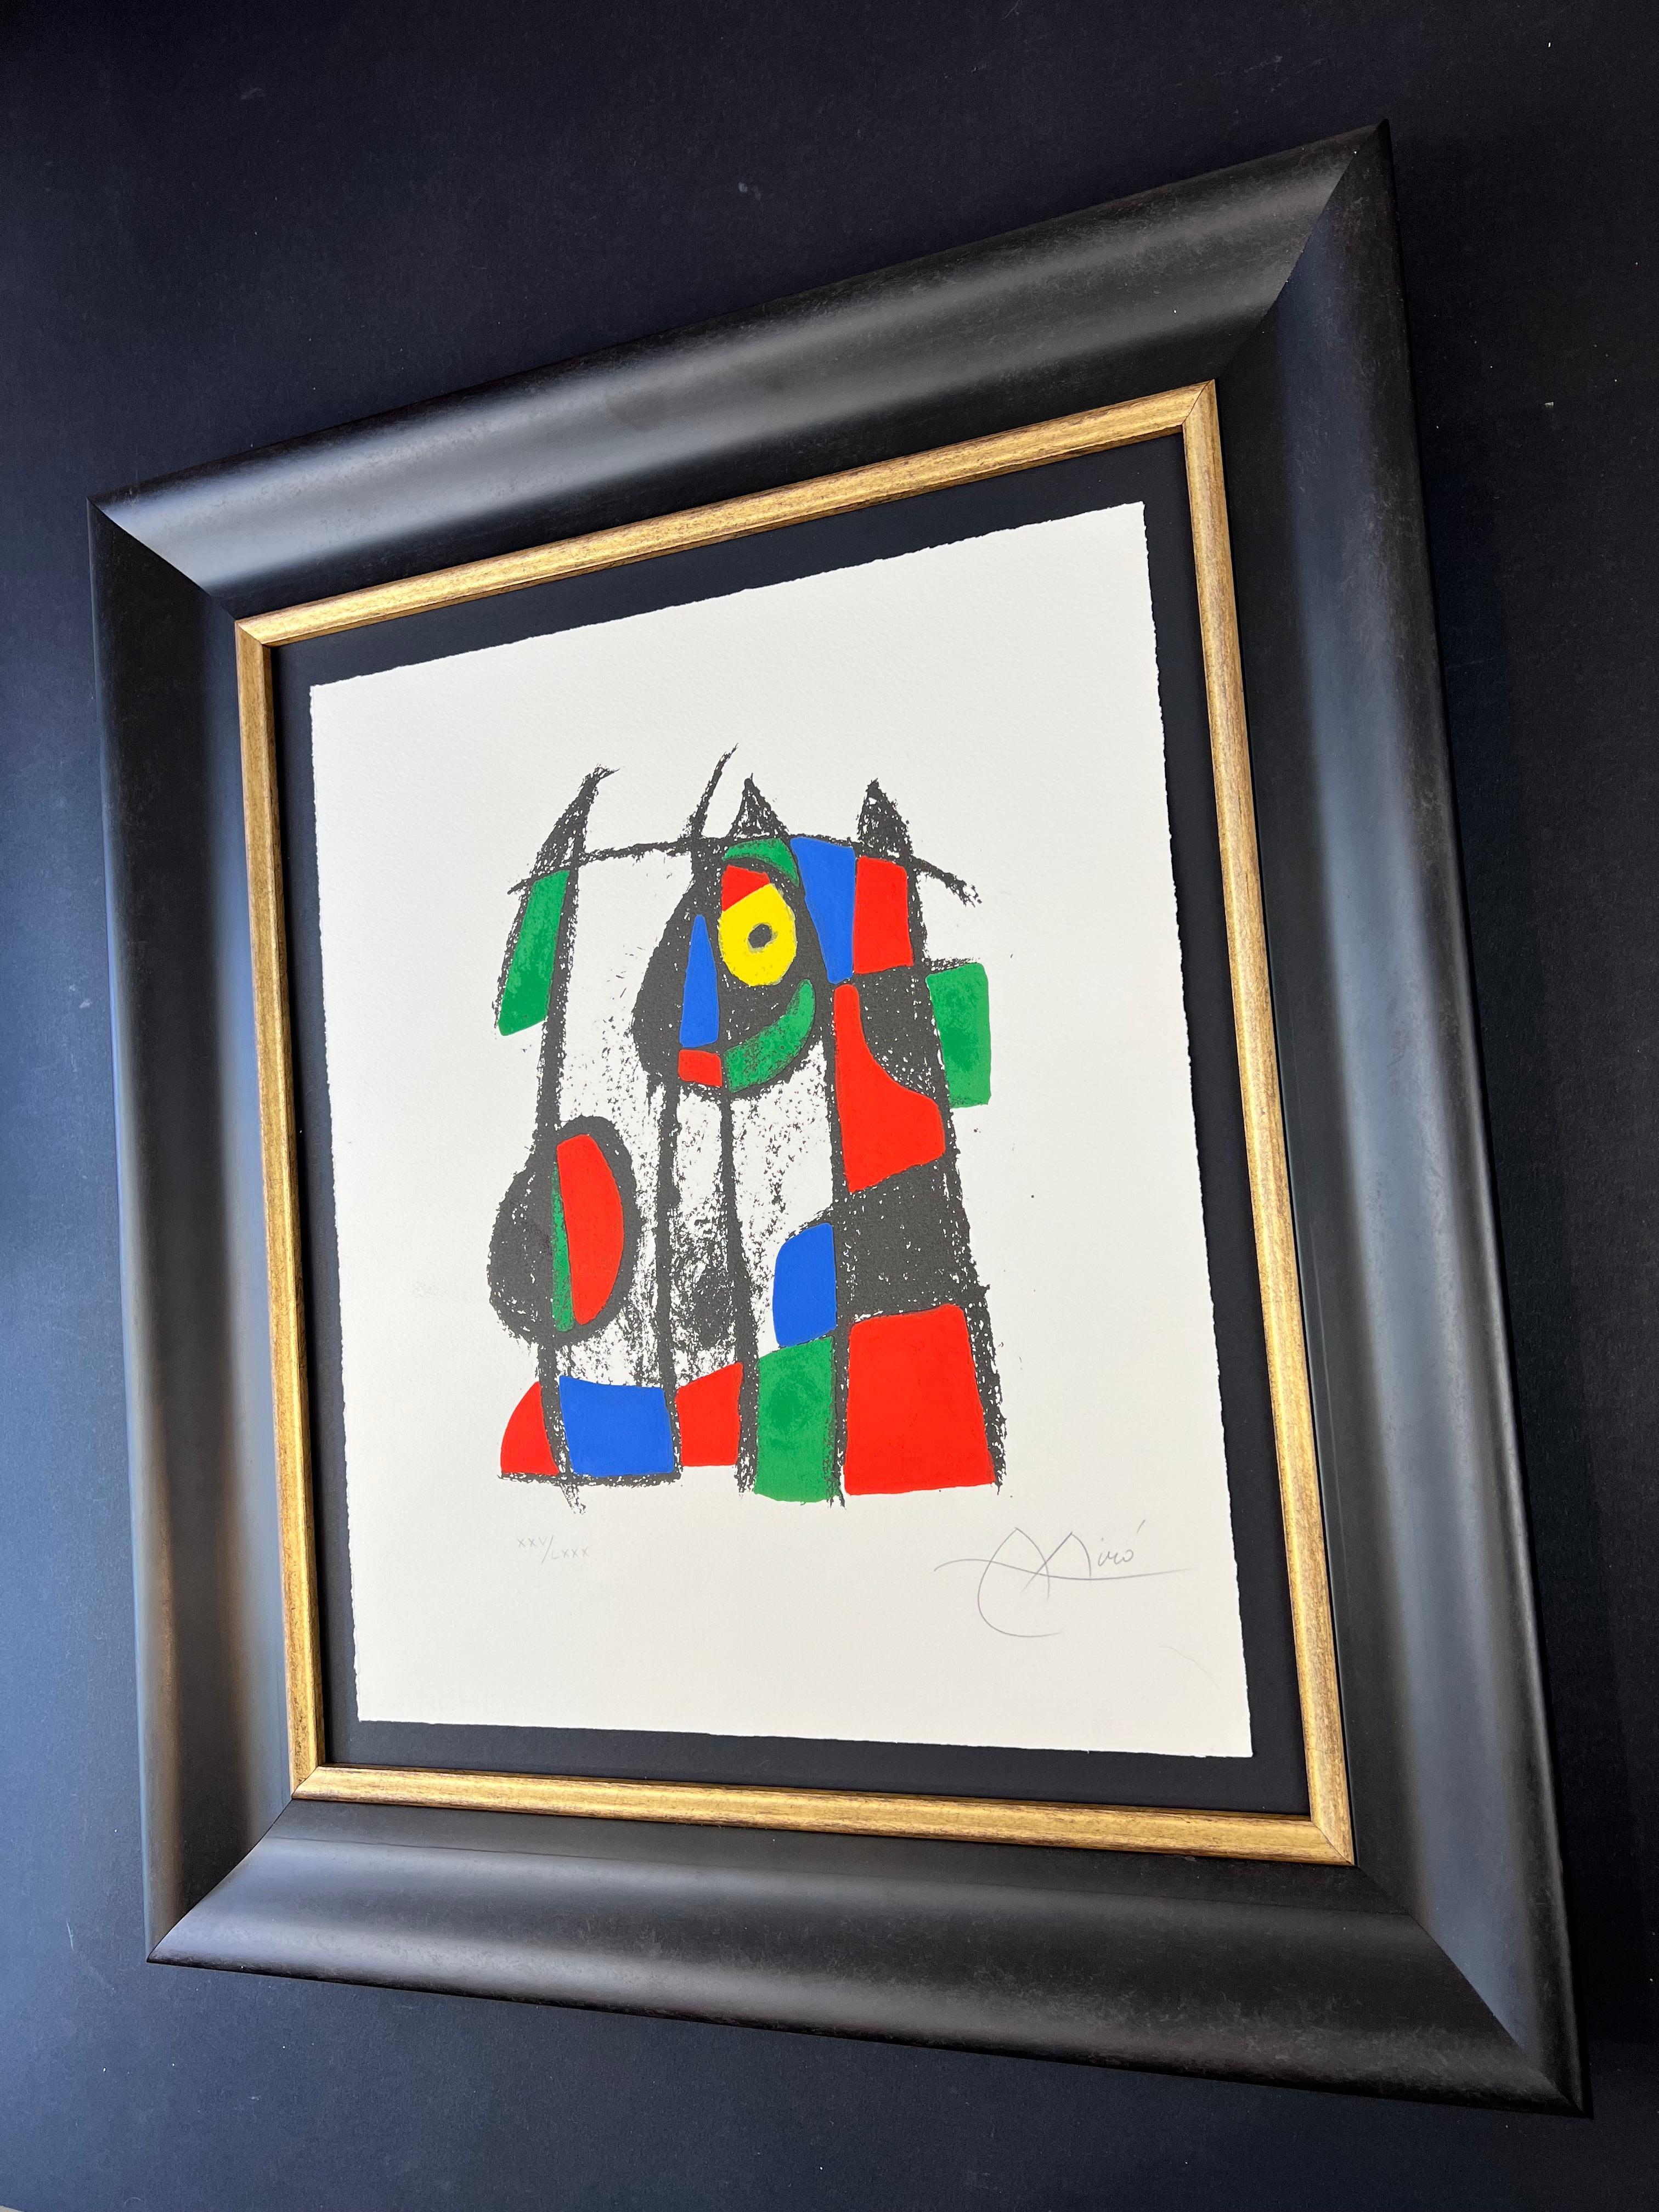 Joan Miró ( 1893 – 1983 ) – hand-signed Lithograph on Arches paper – 1975 5